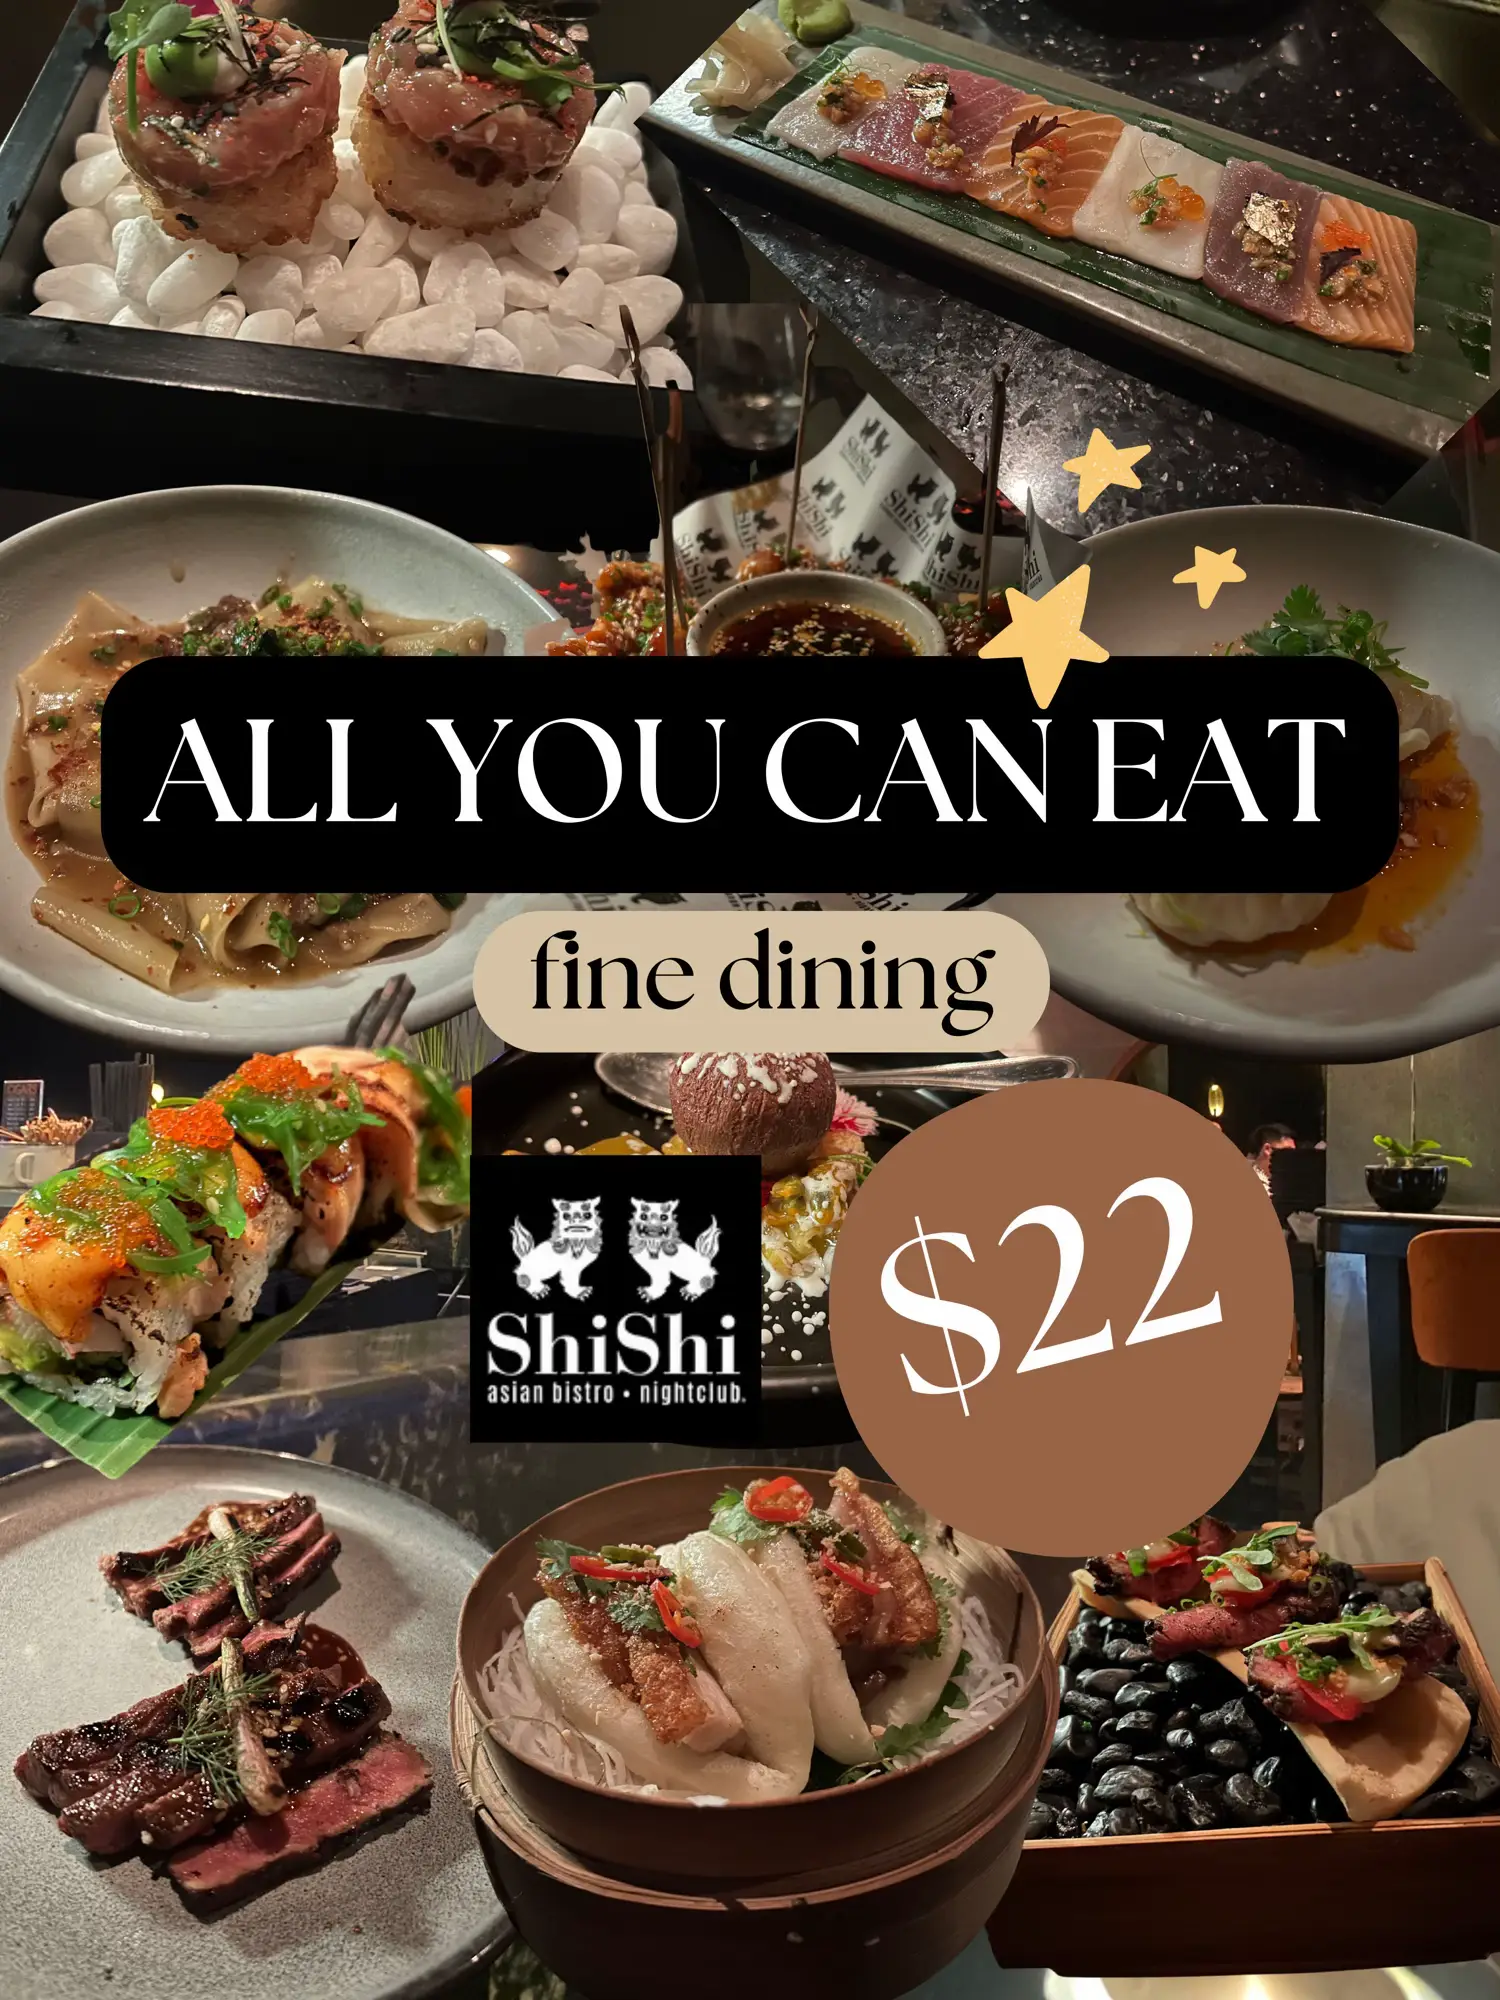 ALL YOU CAN EAT FINE DINING FOR $22?!? 's images(0)